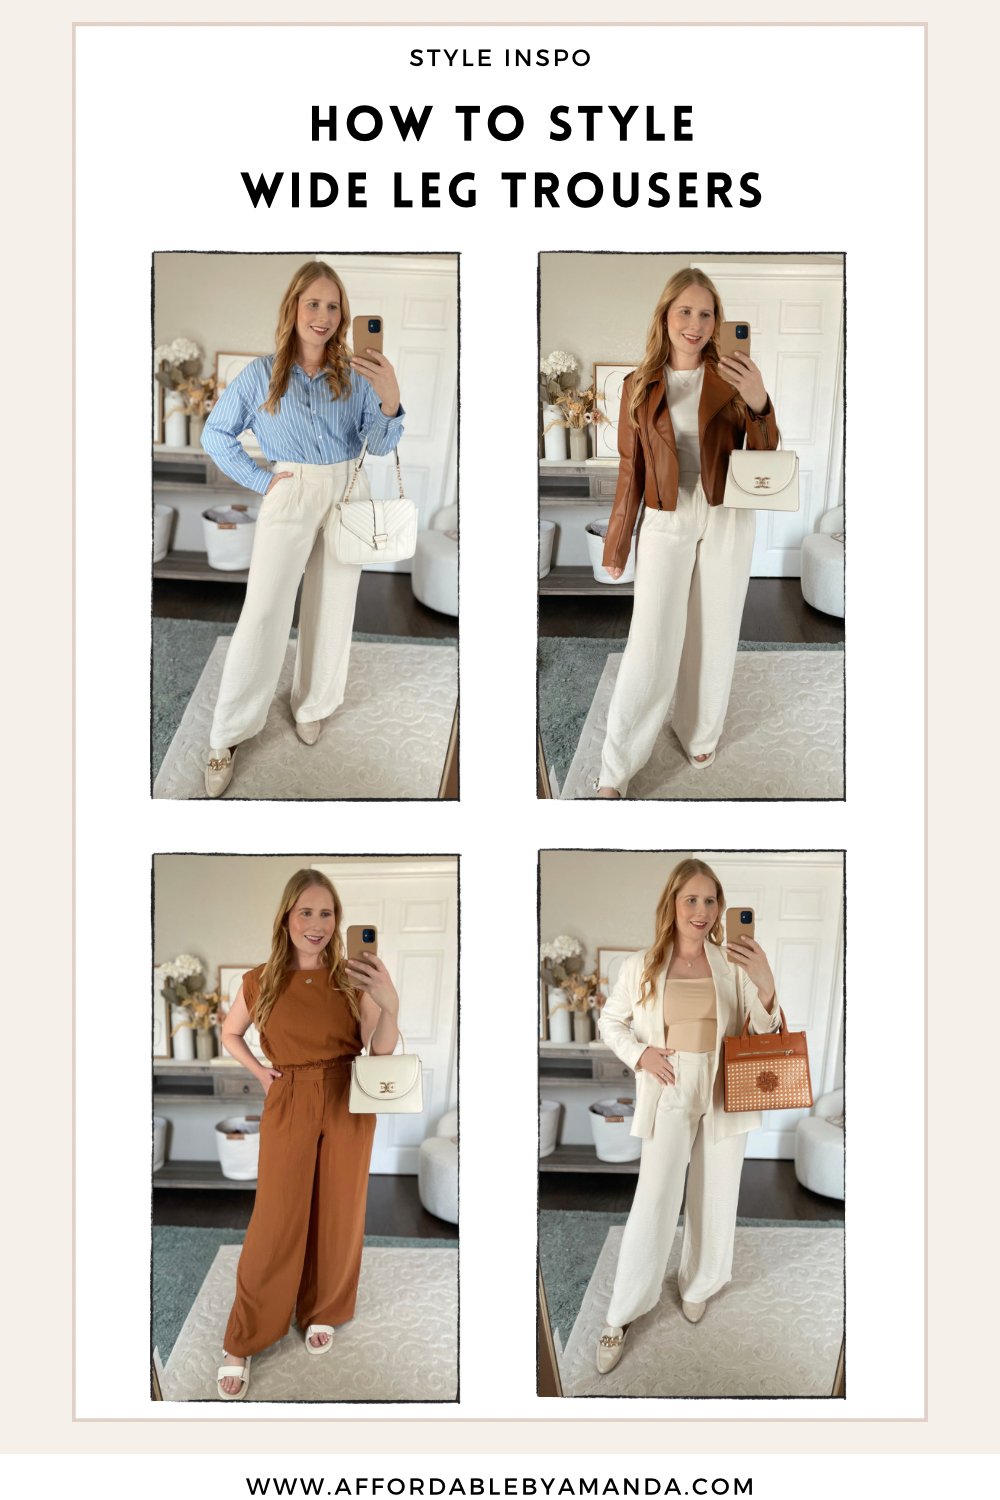 How to Wear Wide Leg Trousers: Style Guide and Outfit Ideas